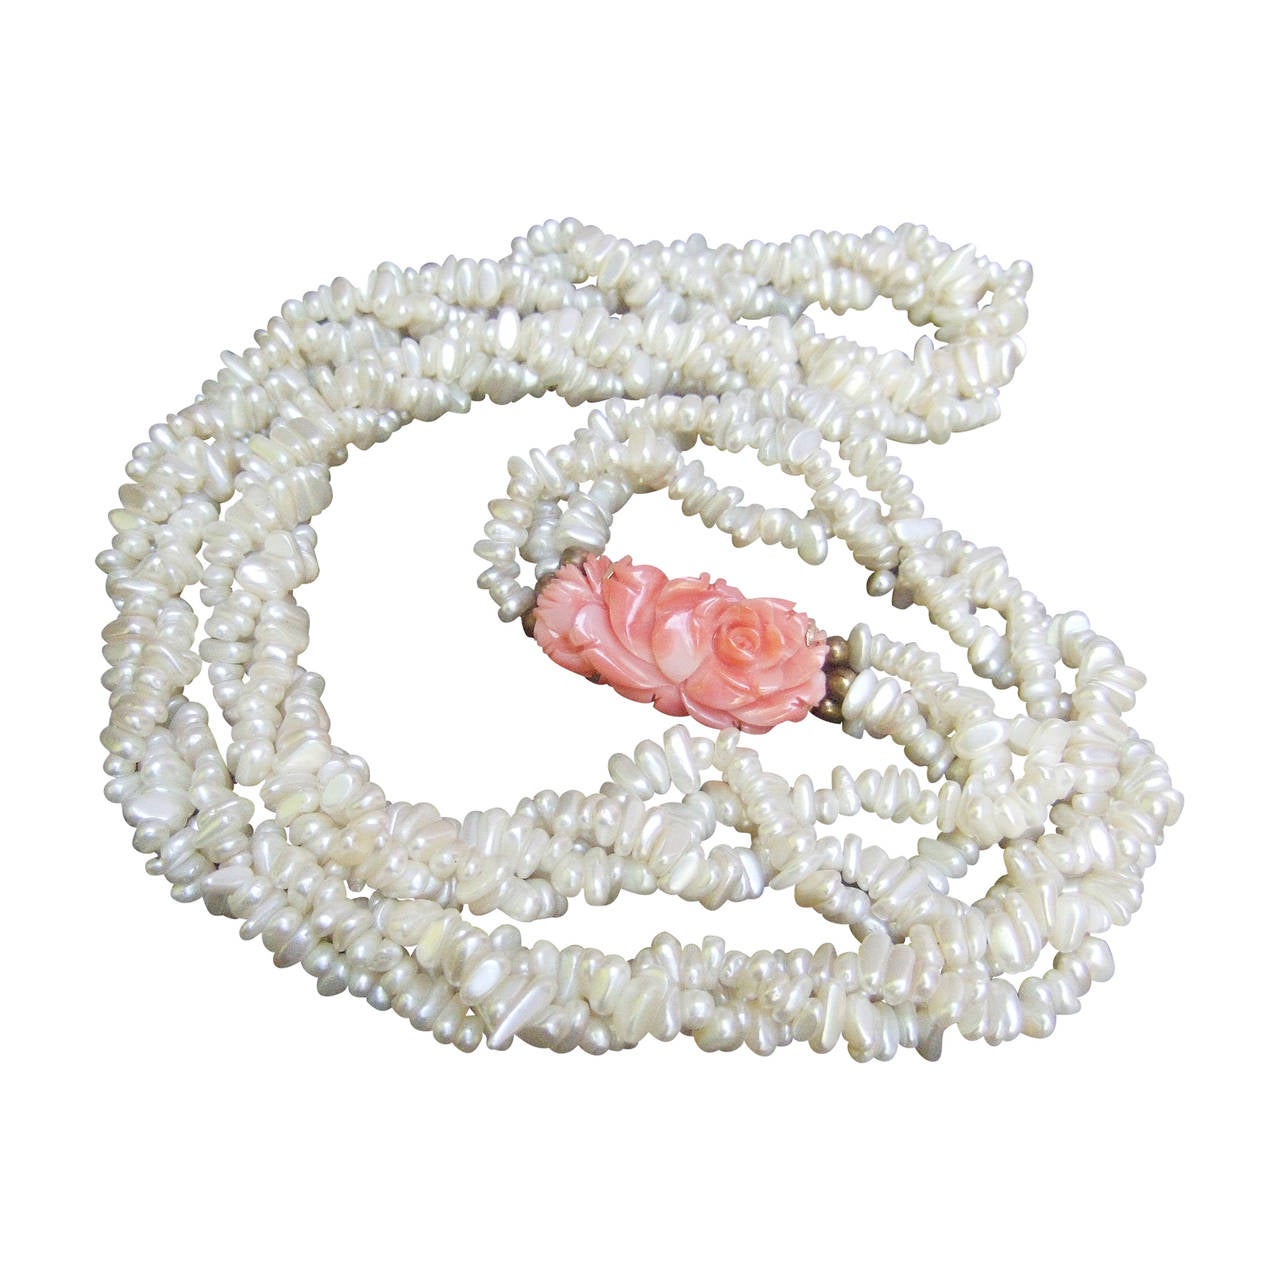 Opulent Freshwater Pearl Carved Coral Braided Necklace